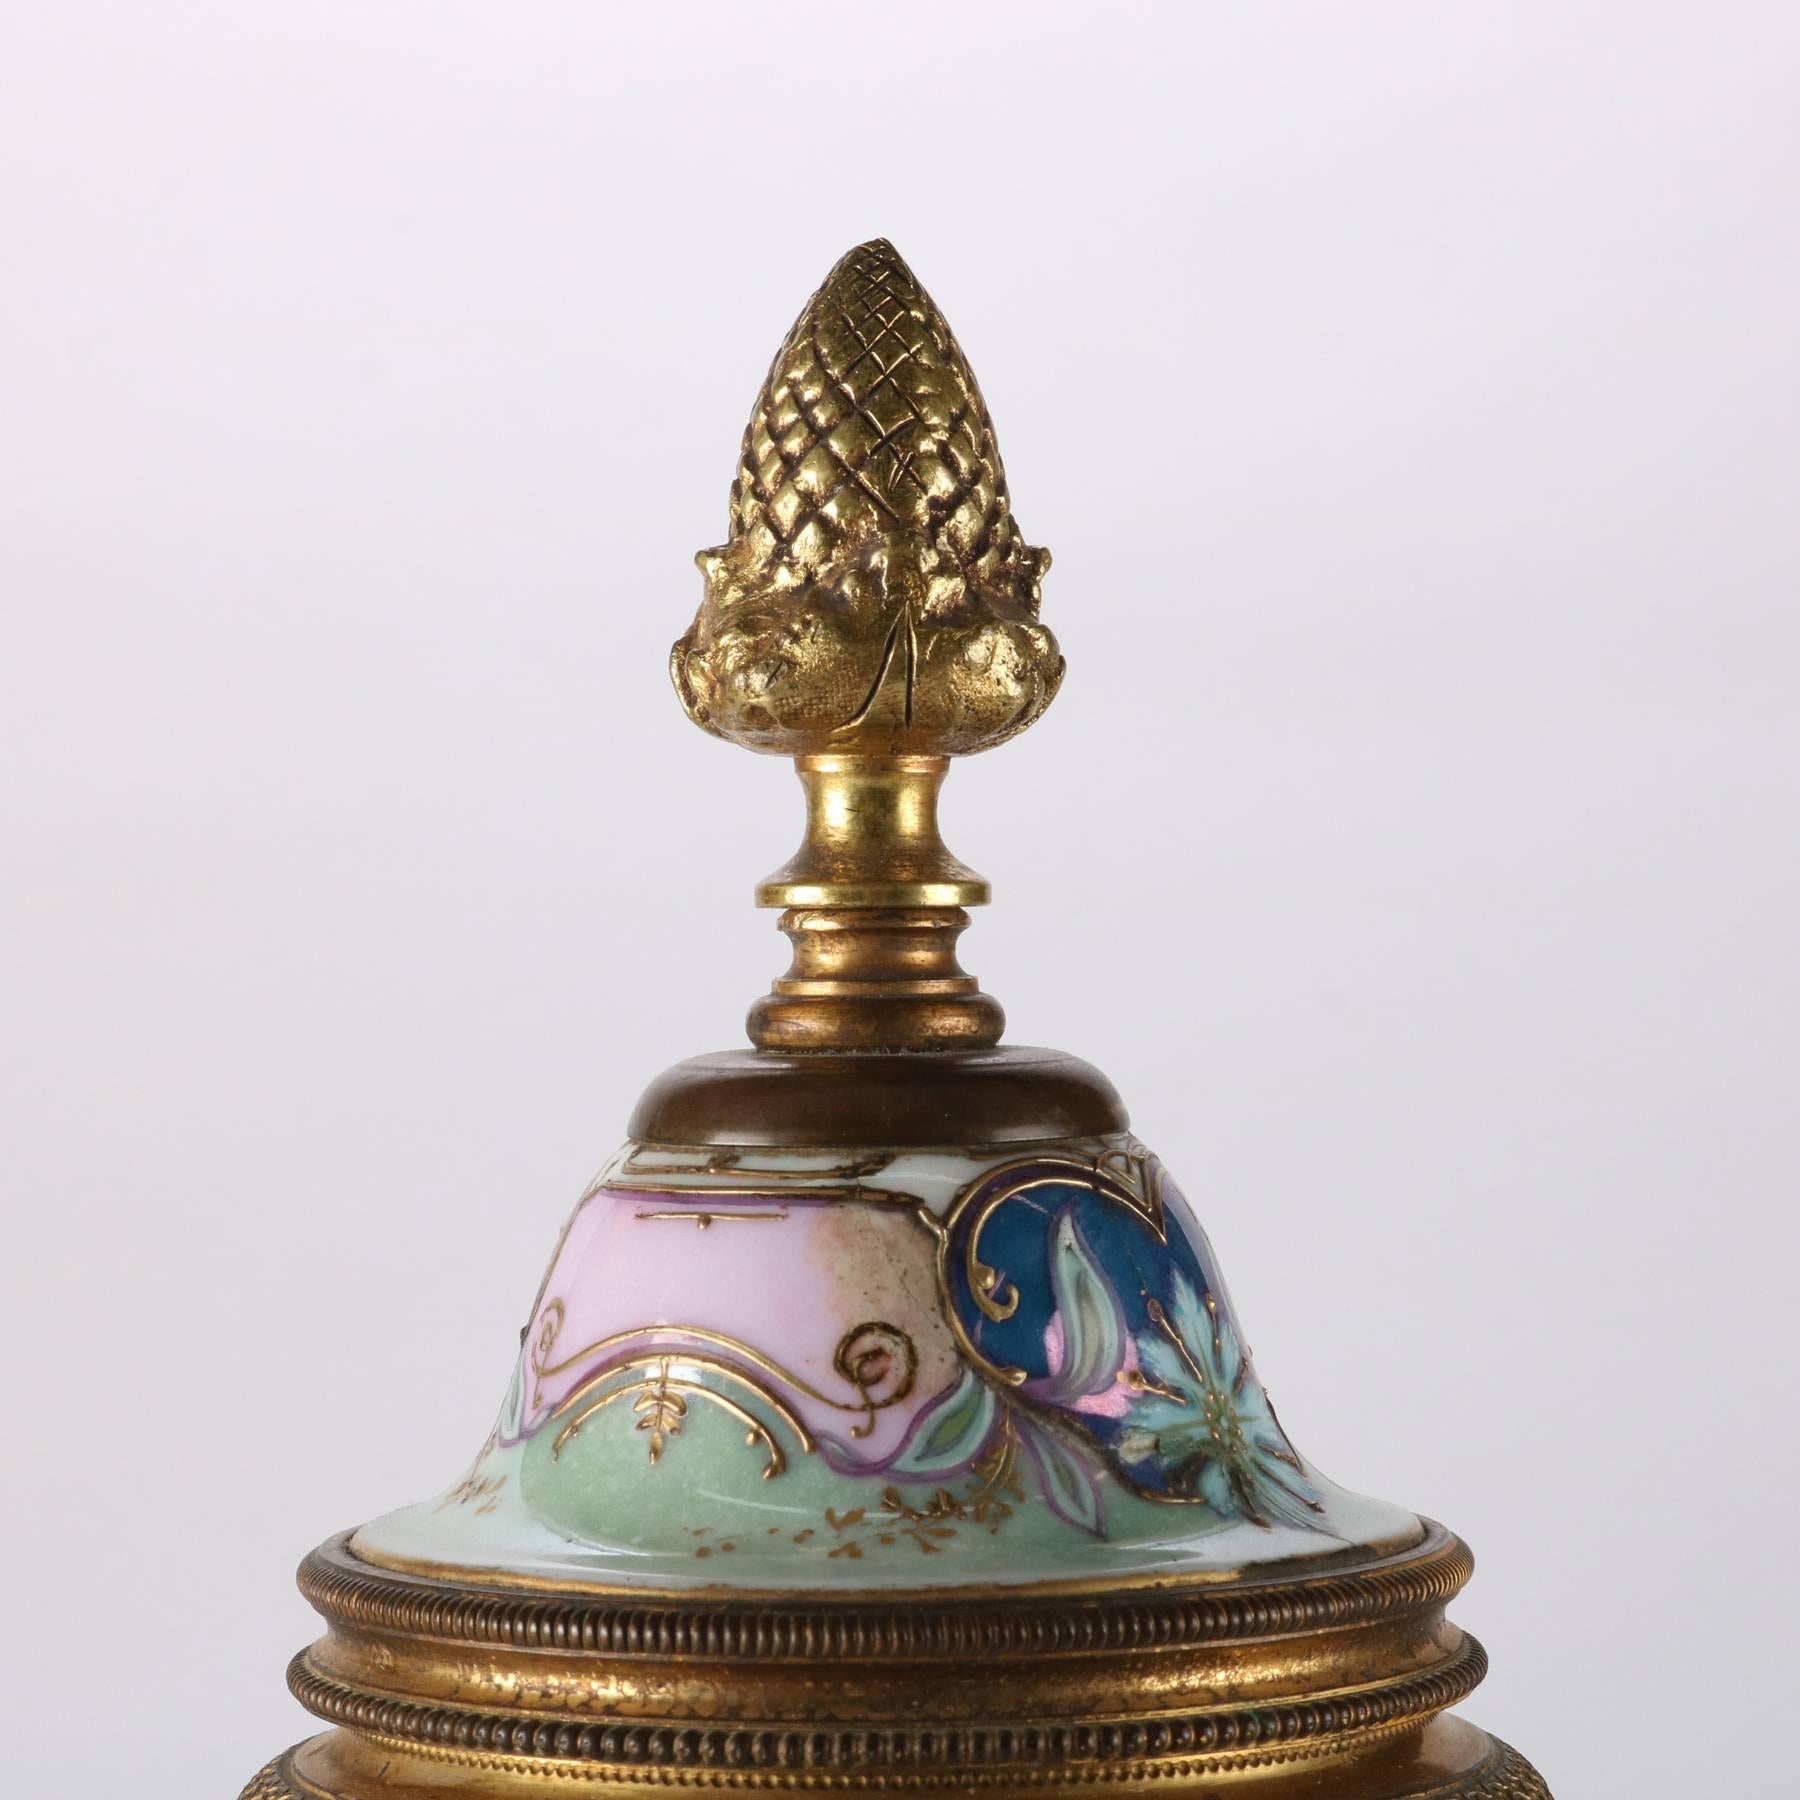 Cast Antique French Sevres Hand-Painted Porcelain Urn with Bronze, Signed Lucot